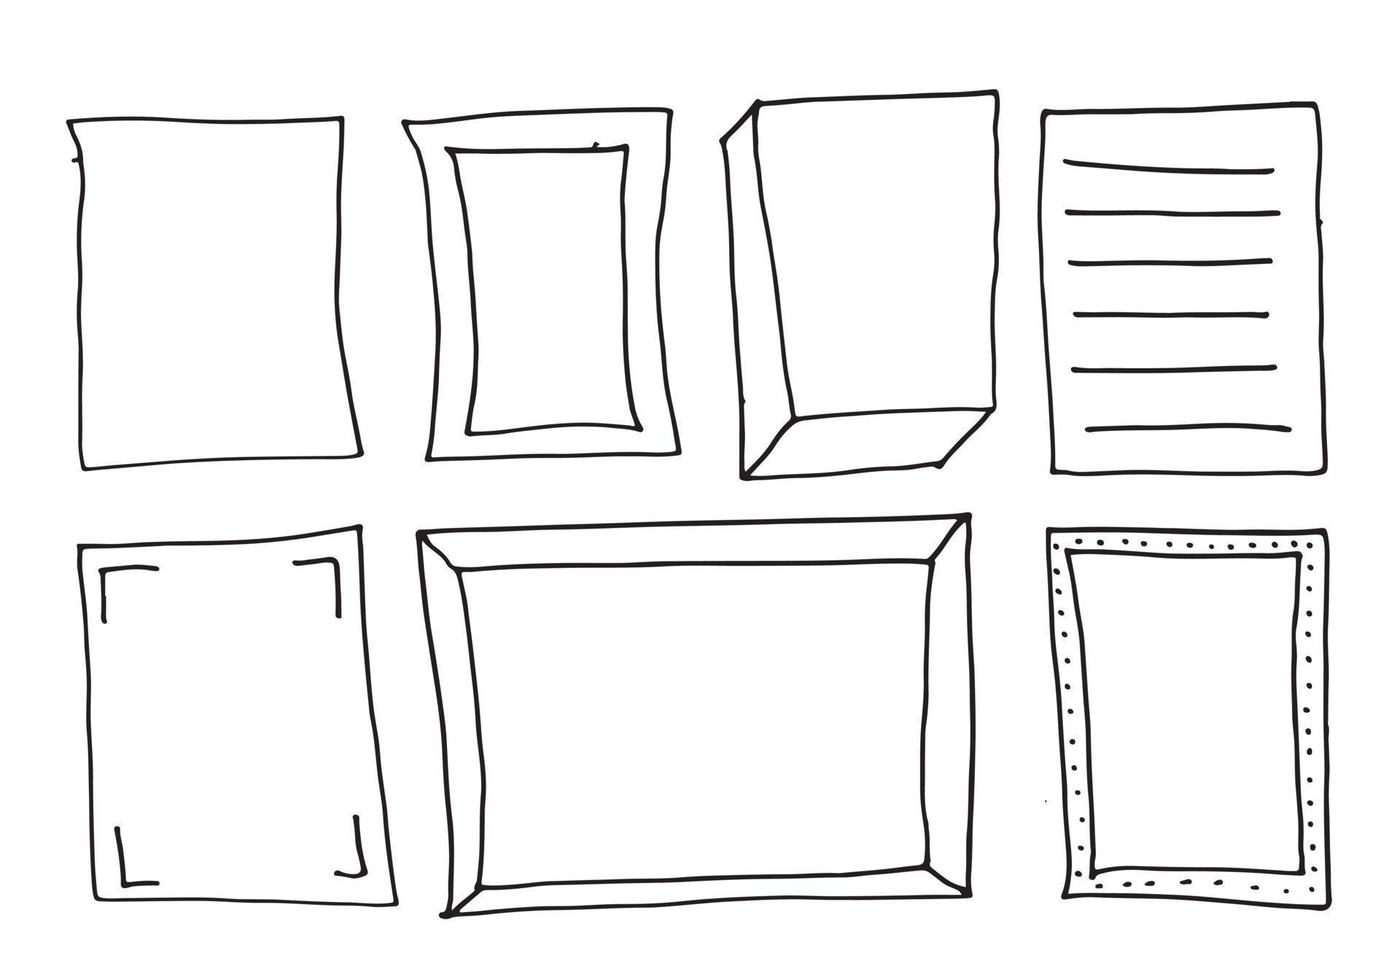 collection of hand drawn doodle frames on a white background for the web, banners and design elements vector